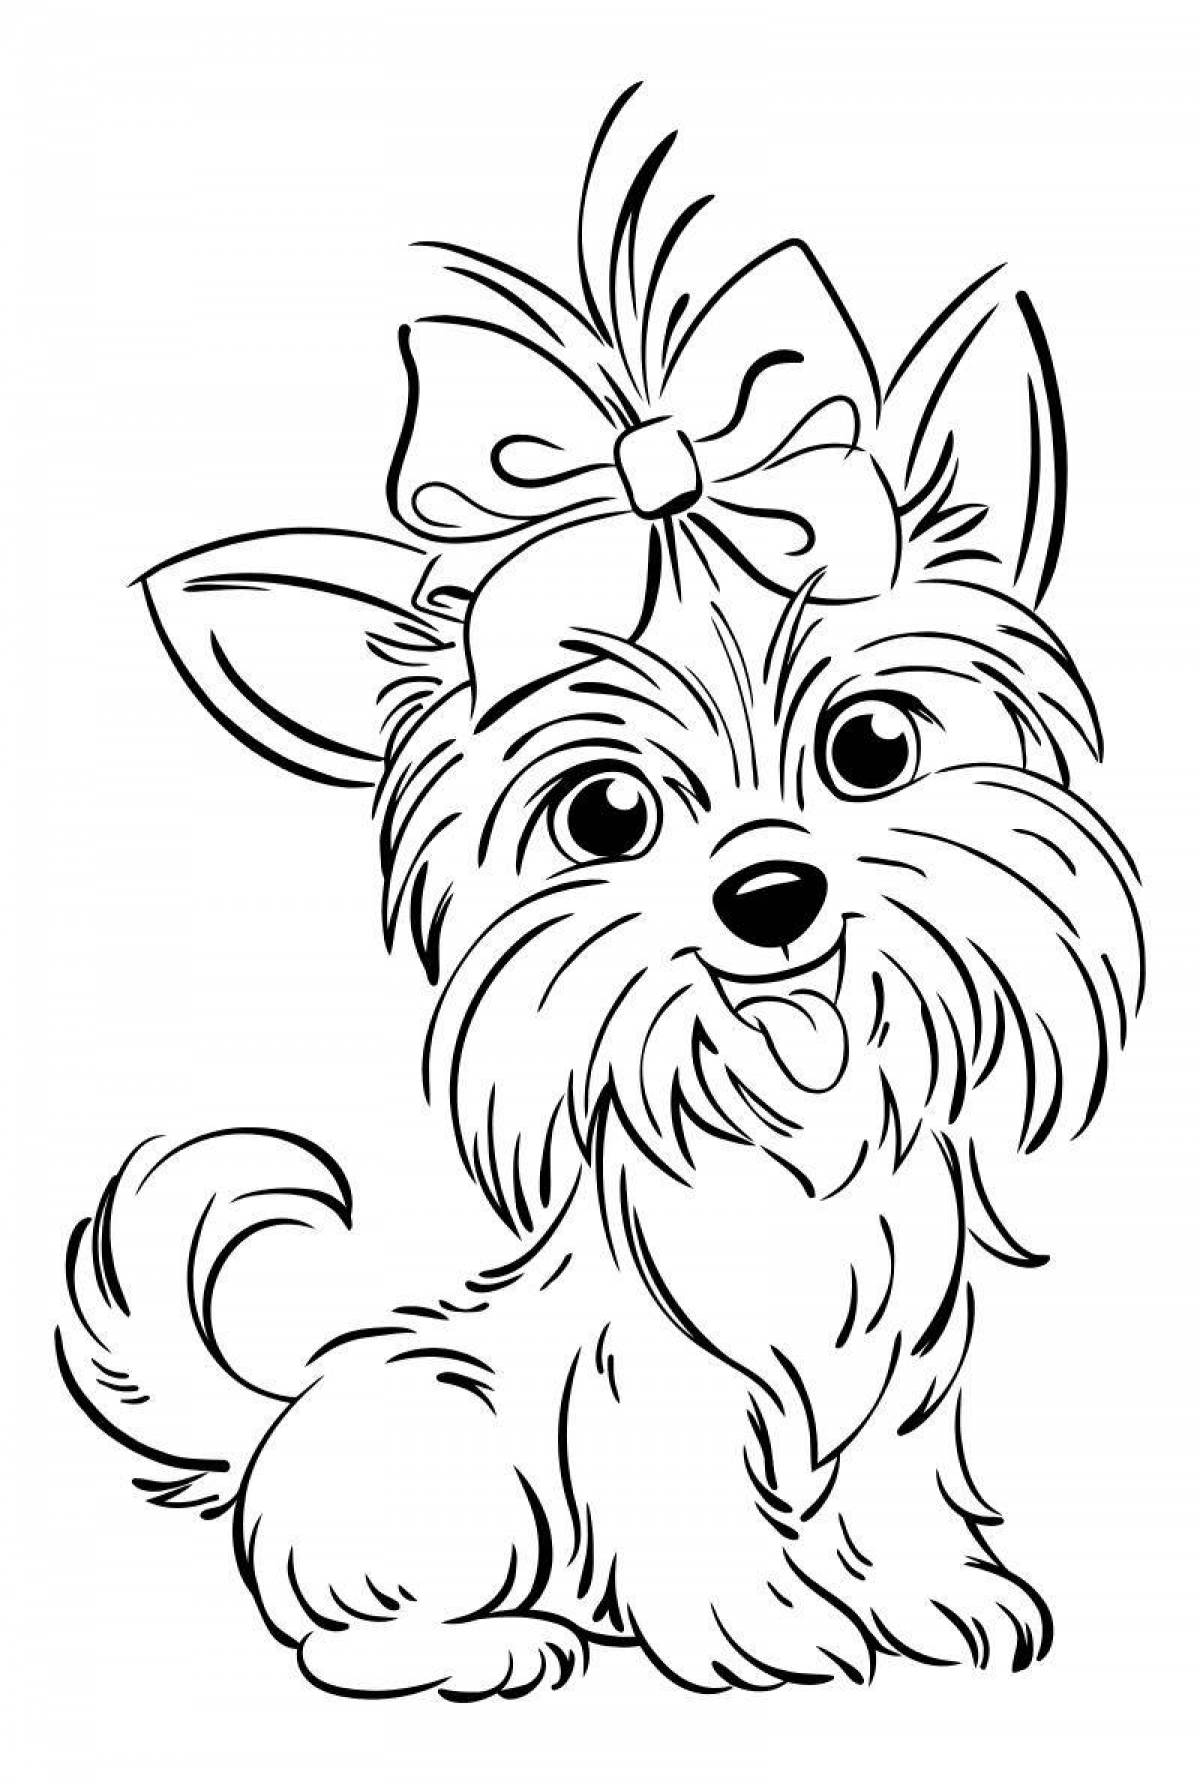 Cute dog coloring for girls